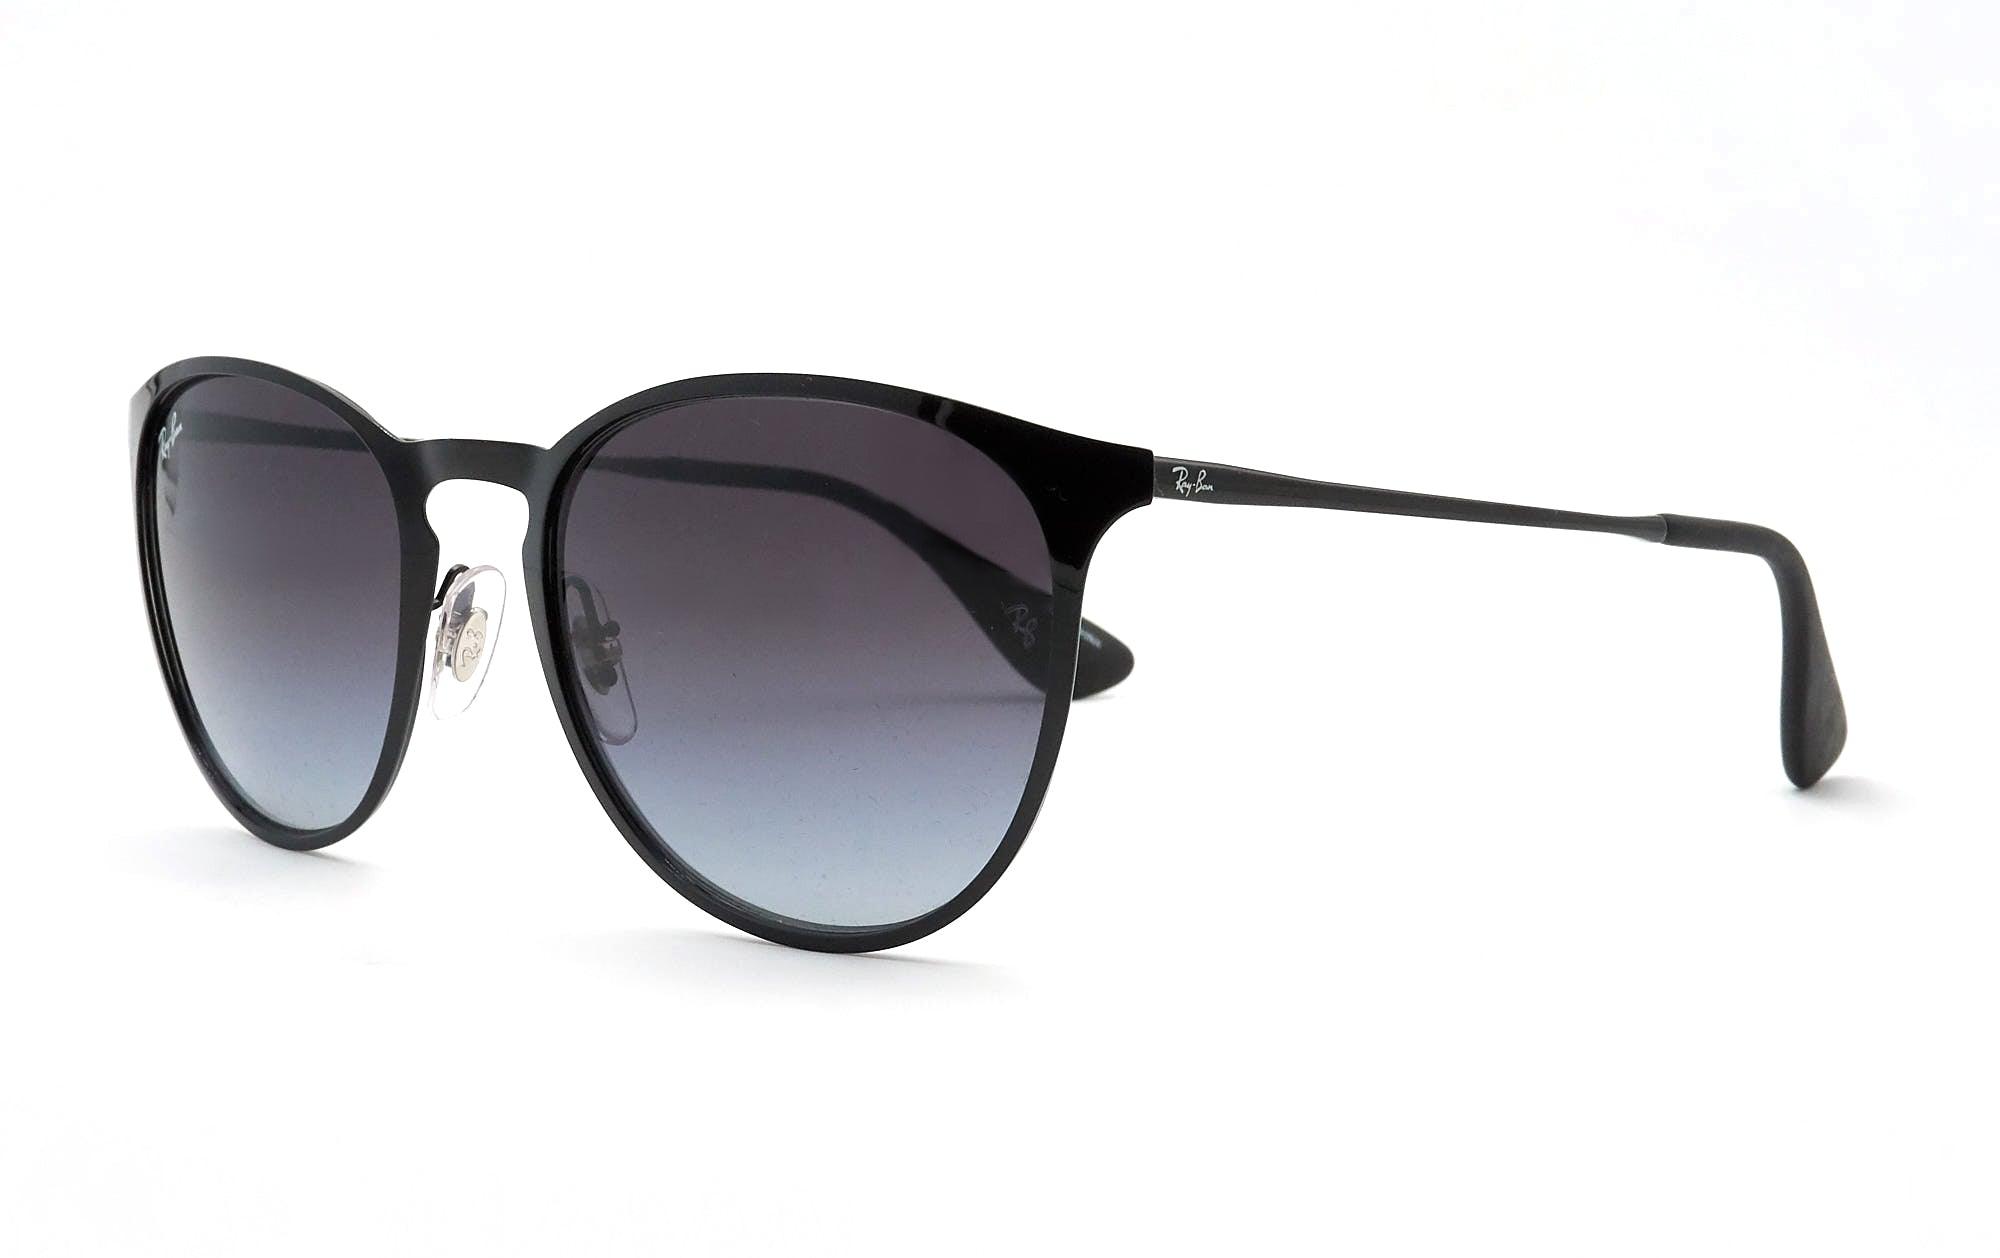 RAY-BAN 3539 002 8G - Opticas Lookout